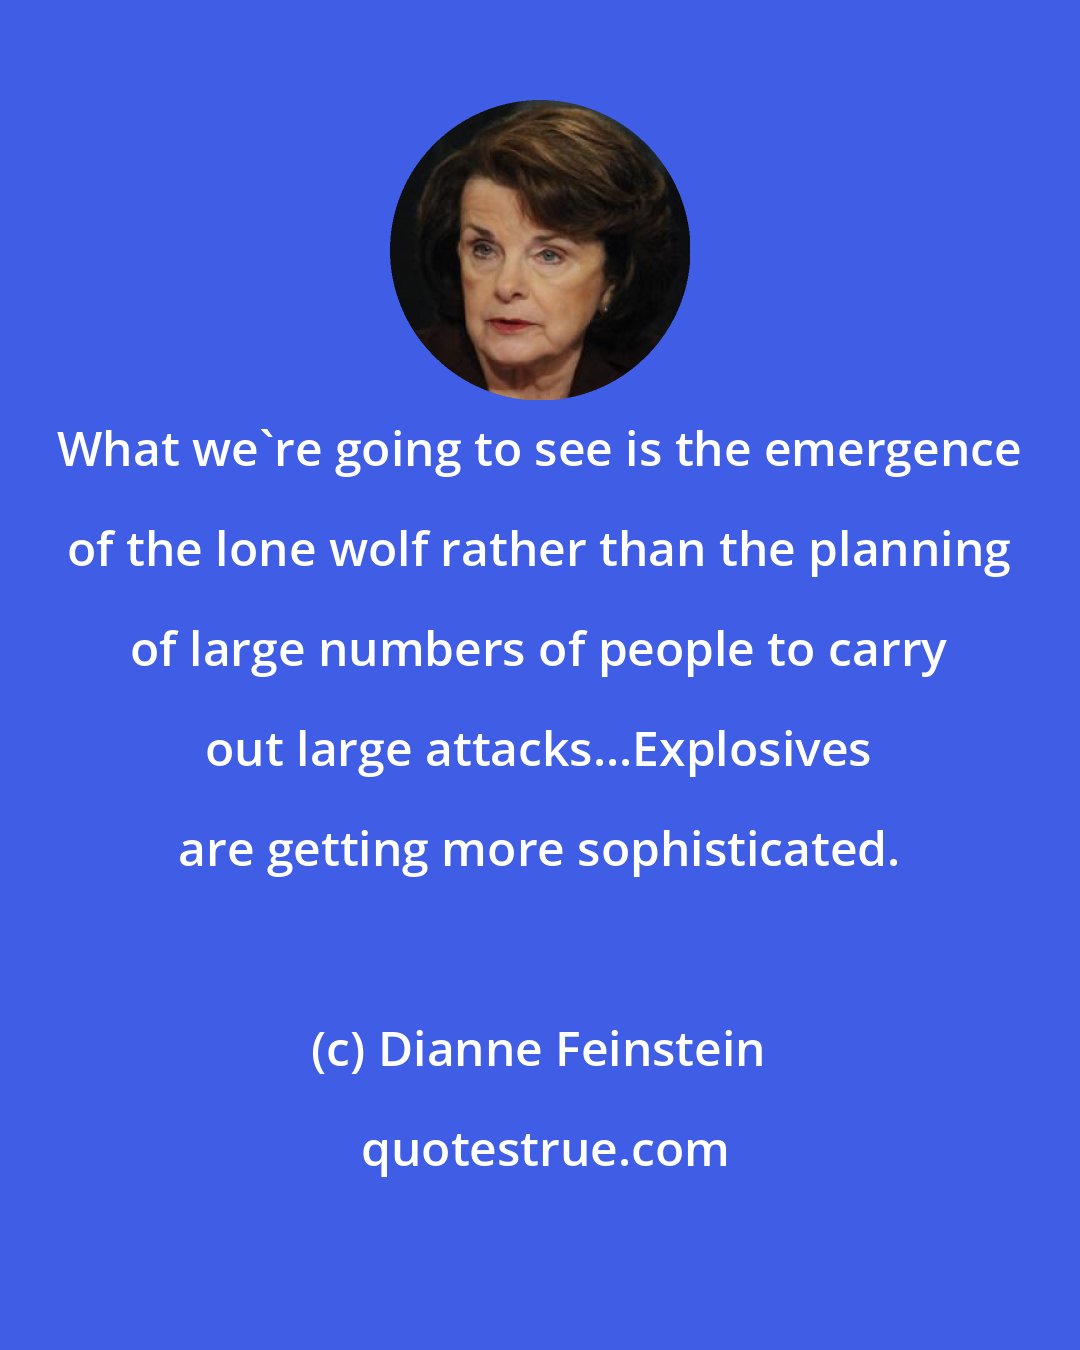 Dianne Feinstein: What we're going to see is the emergence of the lone wolf rather than the planning of large numbers of people to carry out large attacks...Explosives are getting more sophisticated.